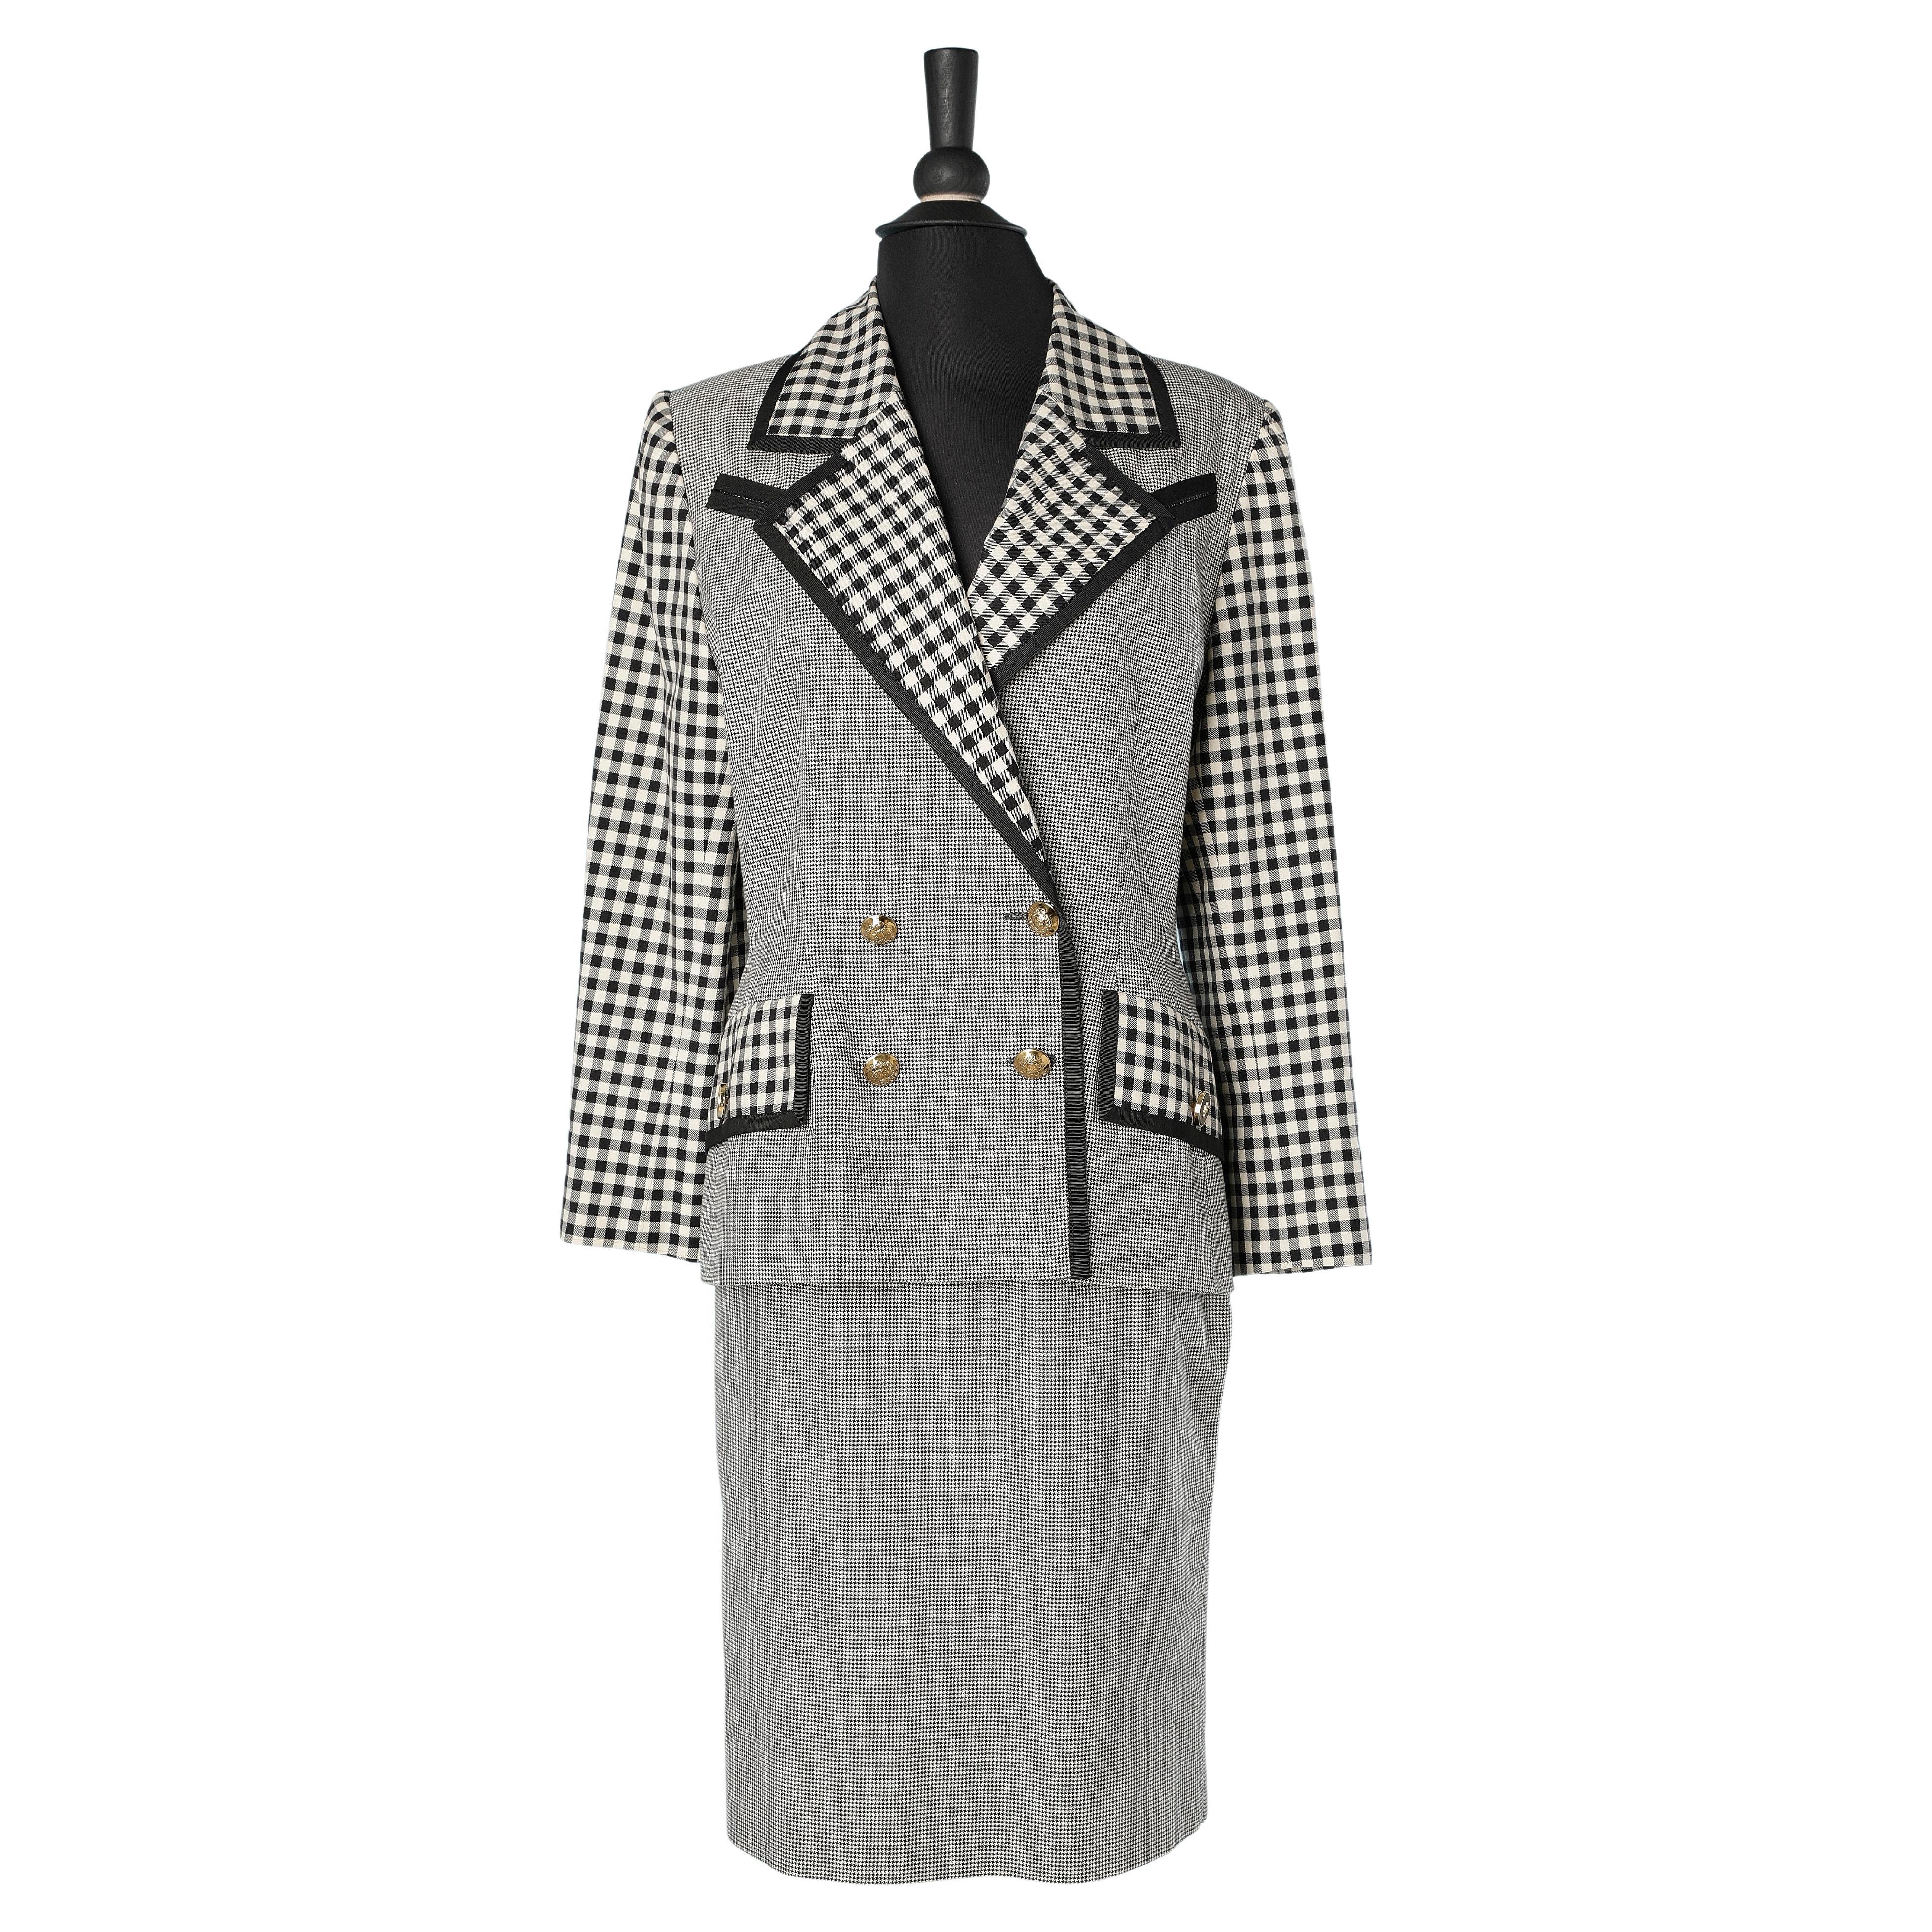 Vichy and houndstooth pattern skirt-suit Jacques Fath for Neiman Marcus